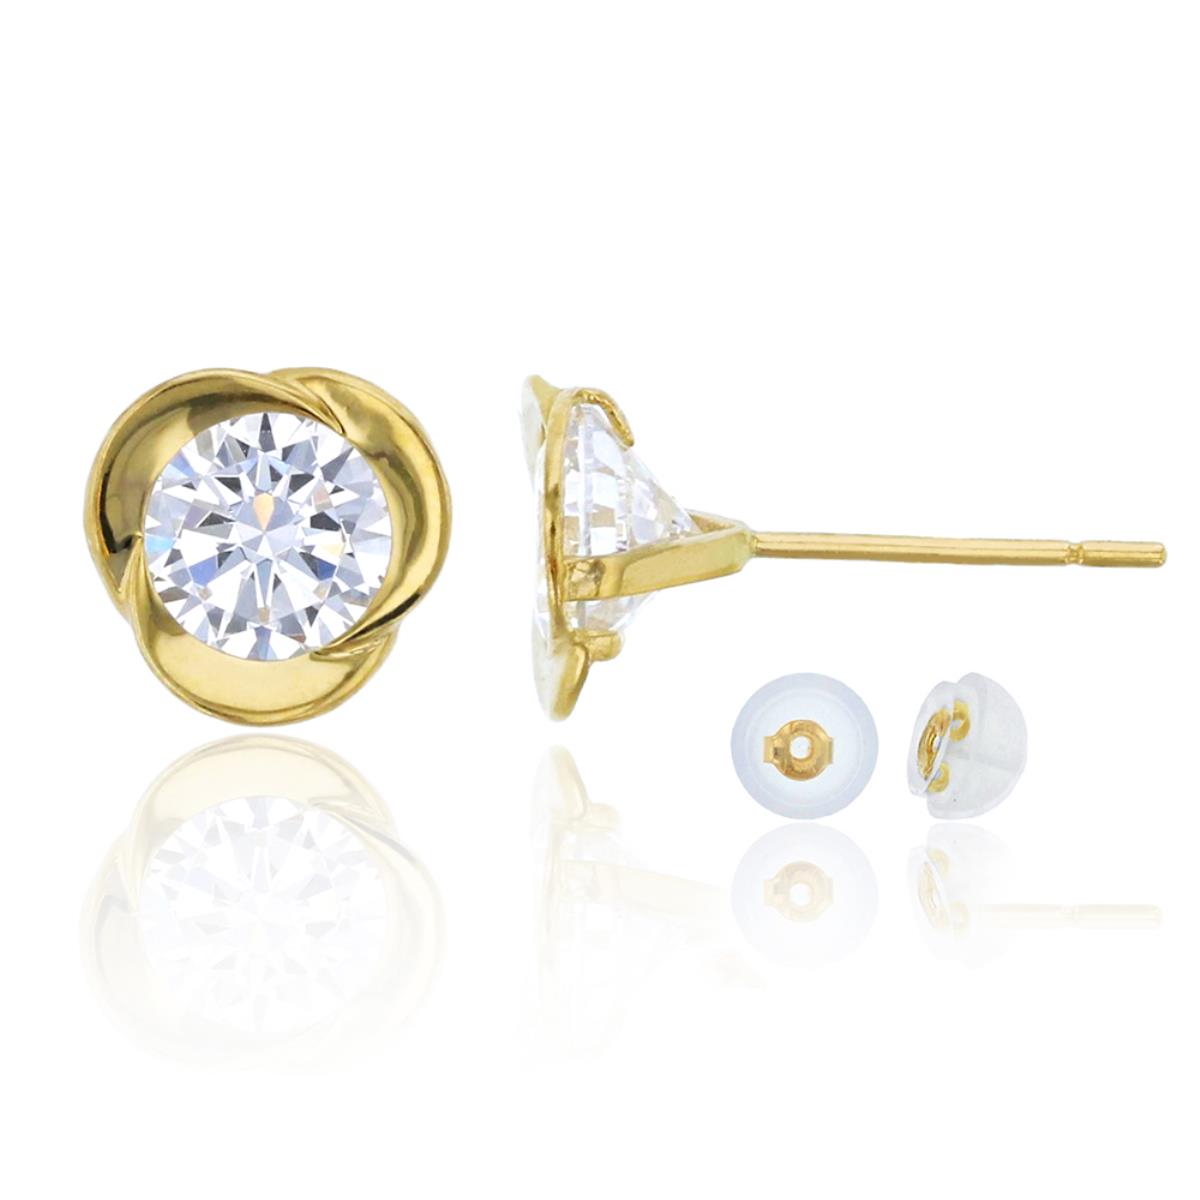 10K Yellow Gold 5mm Rd Celtic Stud Earring & 10K Silicone Back